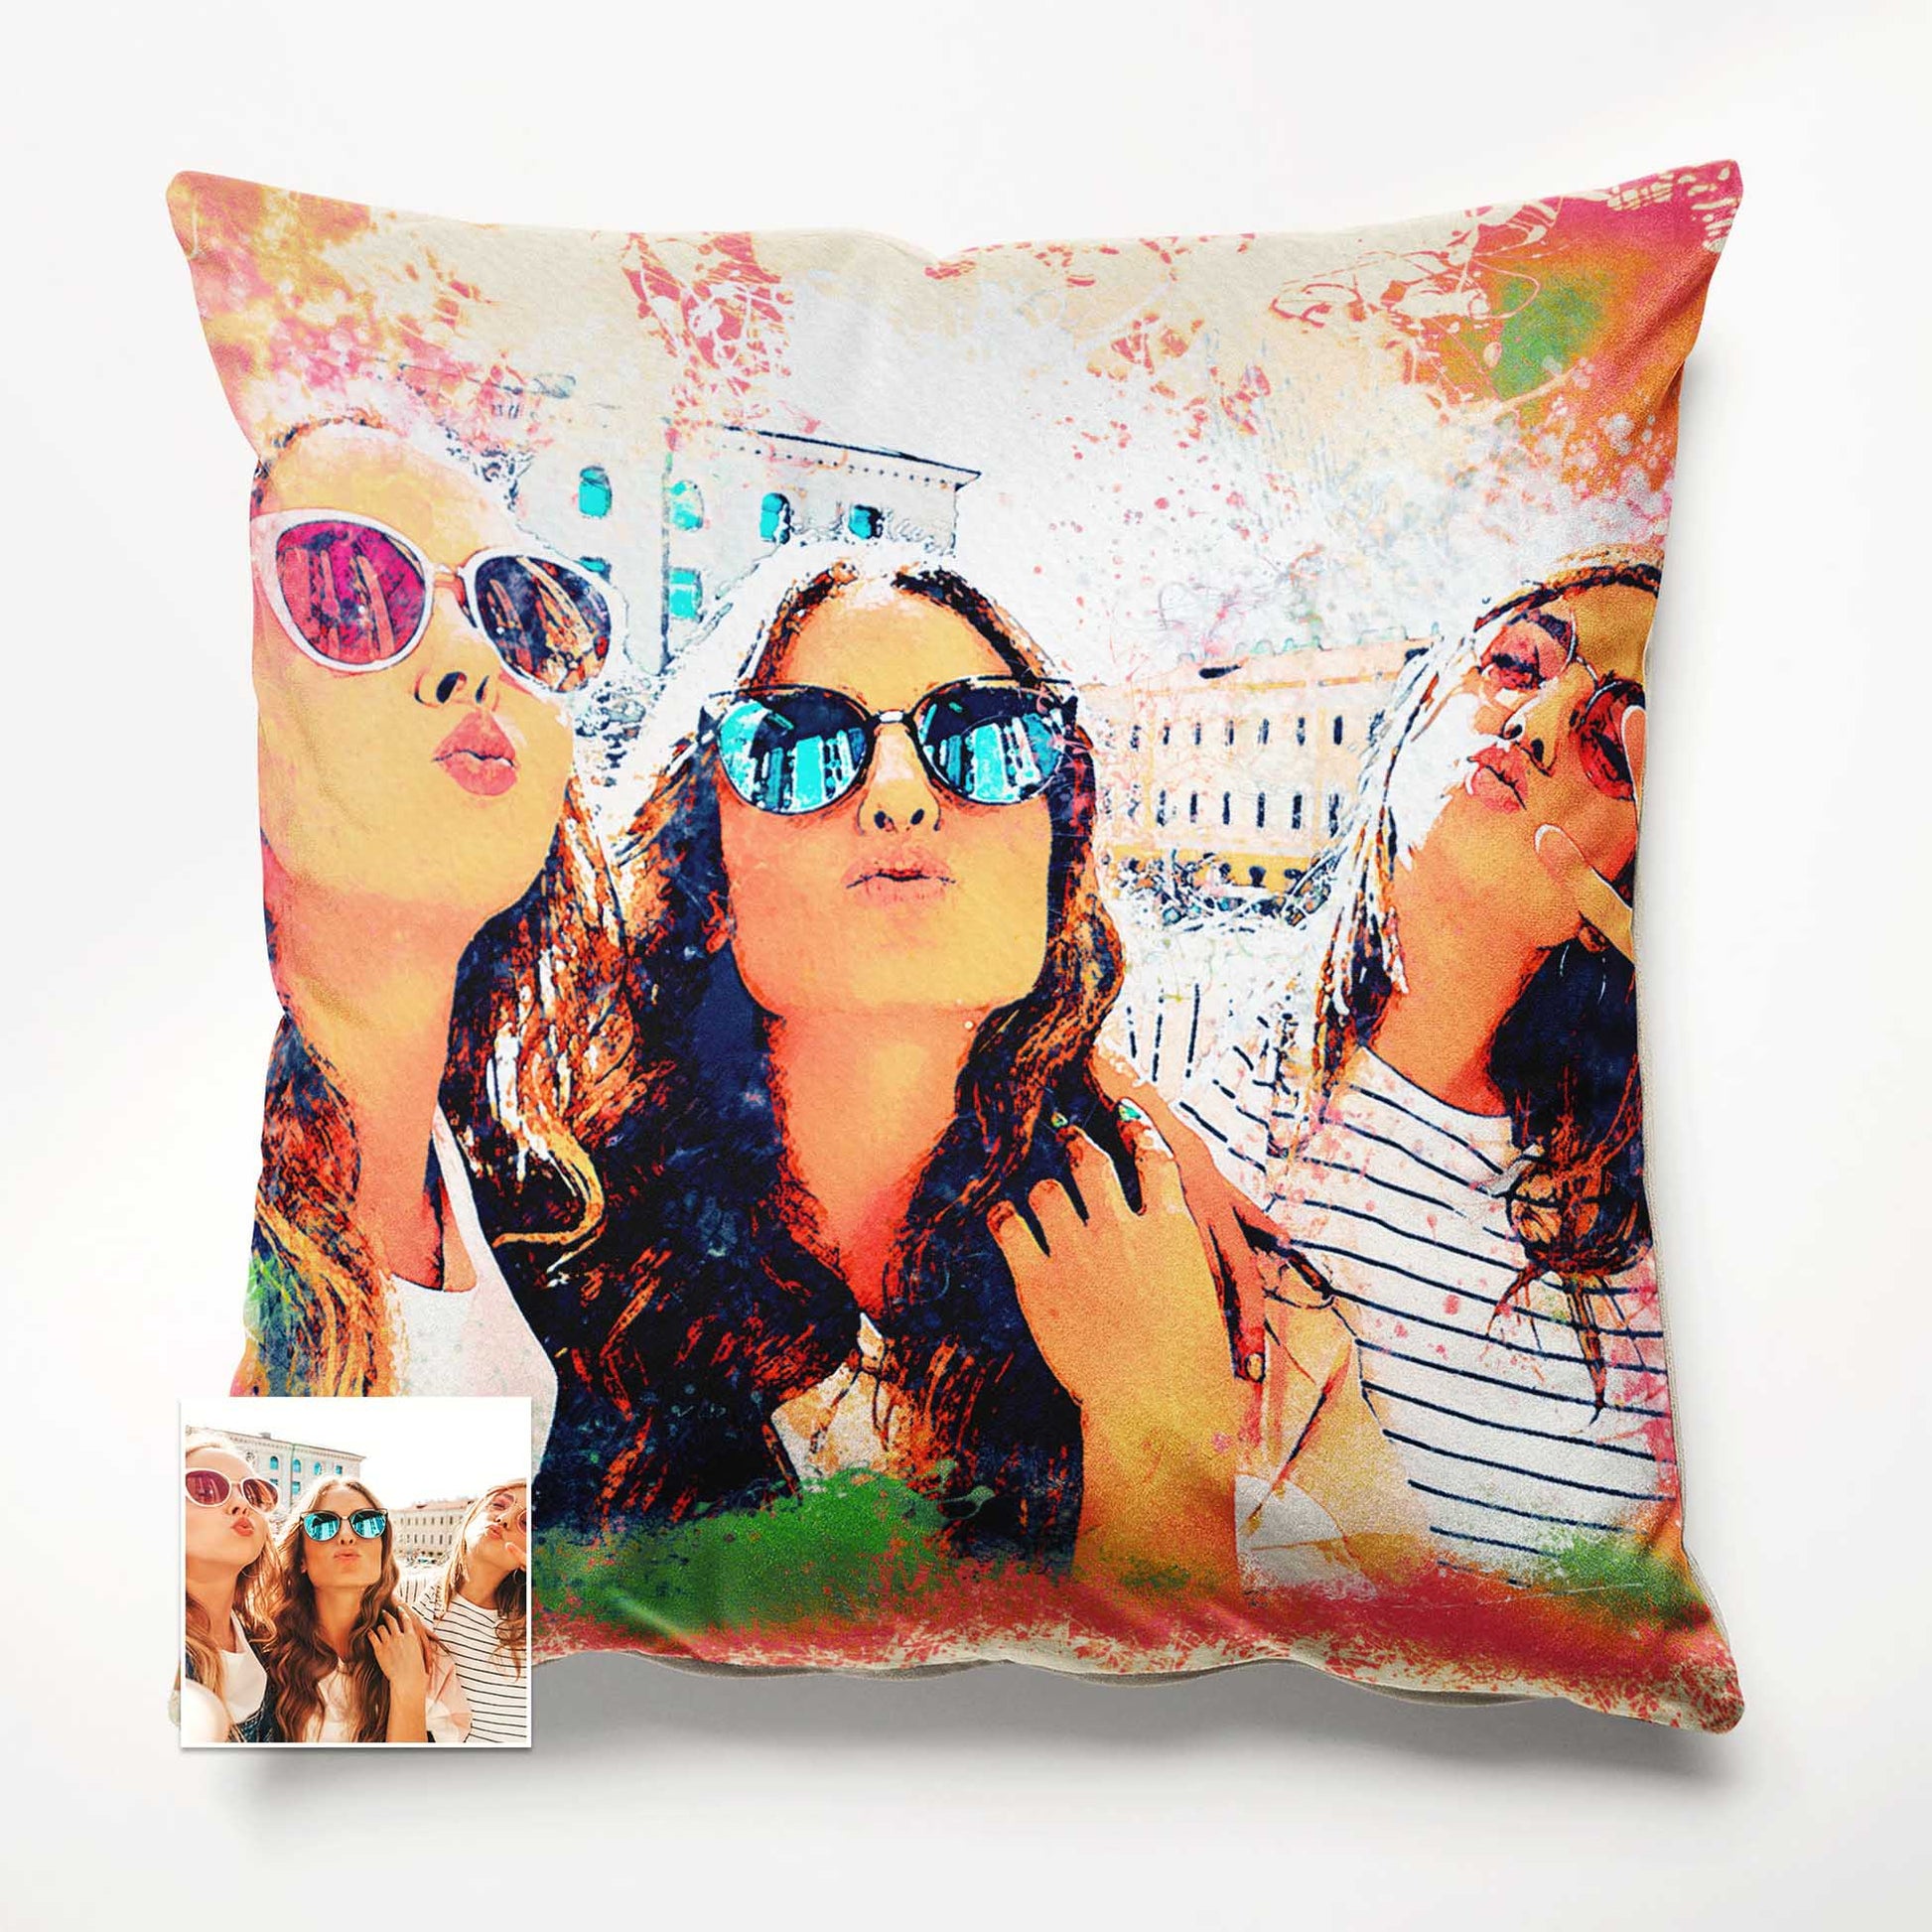 Dive into comfort and style with our Personalised Watercolor Splash Cushion. Its cosy feel invites you to relax and unwind, while the vibrant and exciting watercolor splash design adds a unique and original touch to your interior